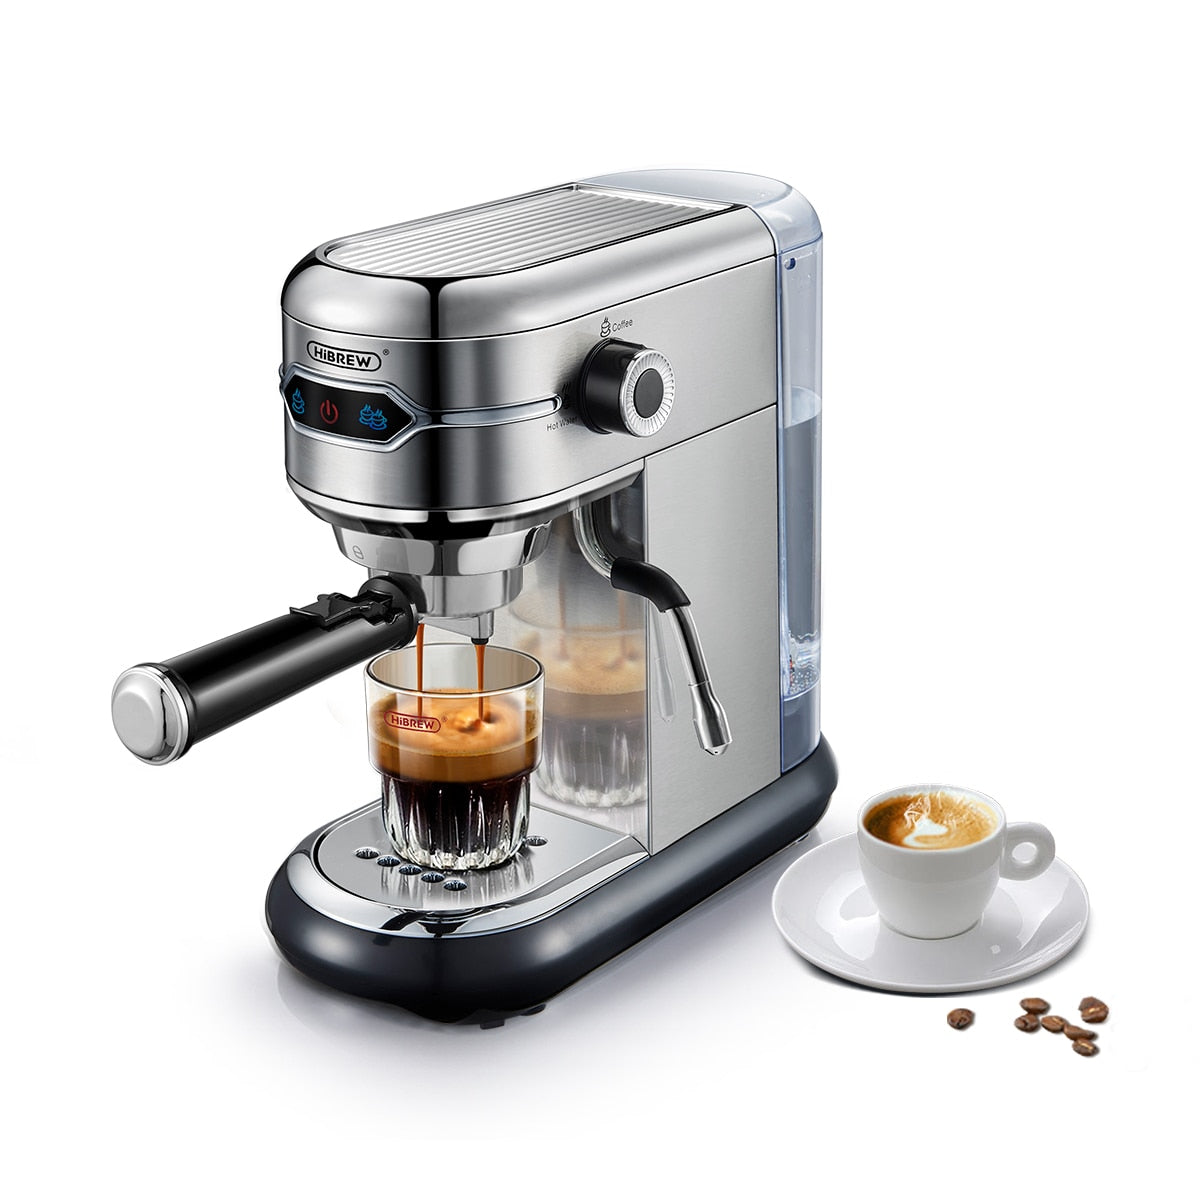 HiBREW Coffee Maker Cafetera – boggy